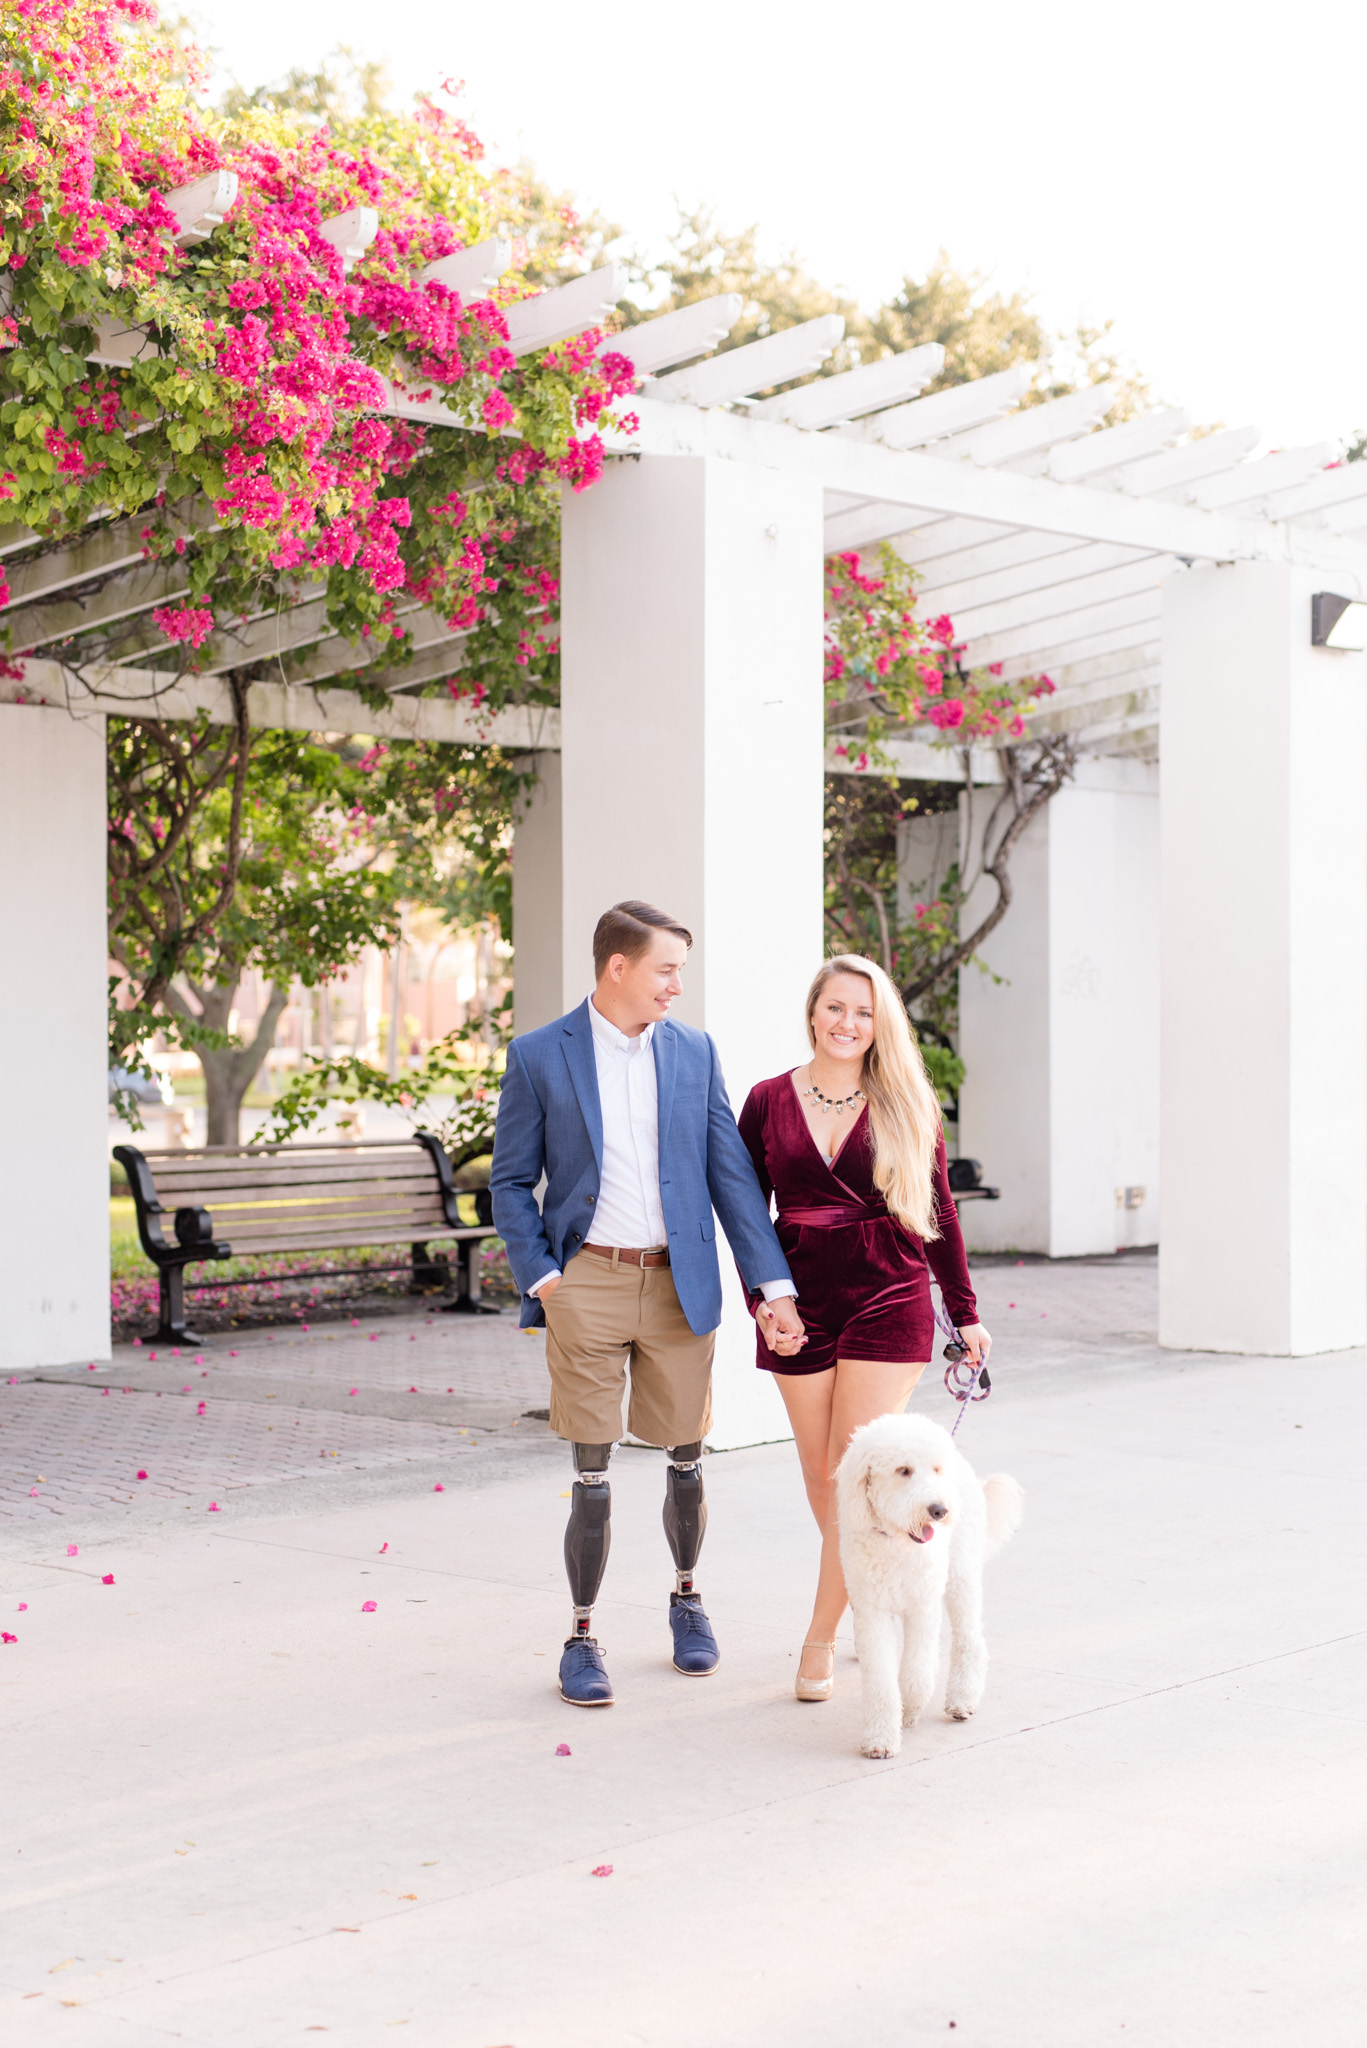 Couple walks with dog in front of flower pergola.